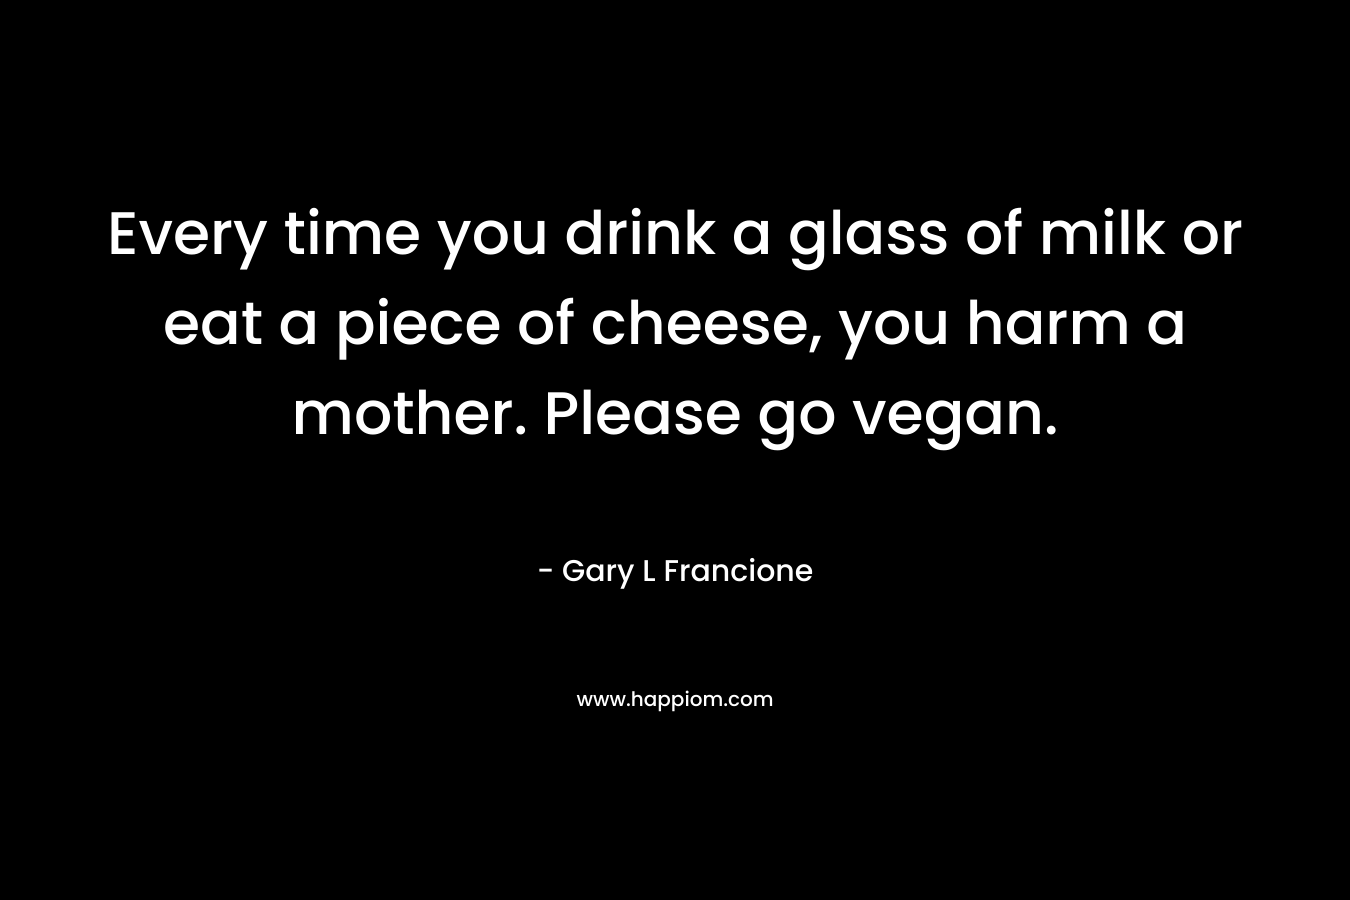 Every time you drink a glass of milk or eat a piece of cheese, you harm a mother. Please go vegan. – Gary L Francione